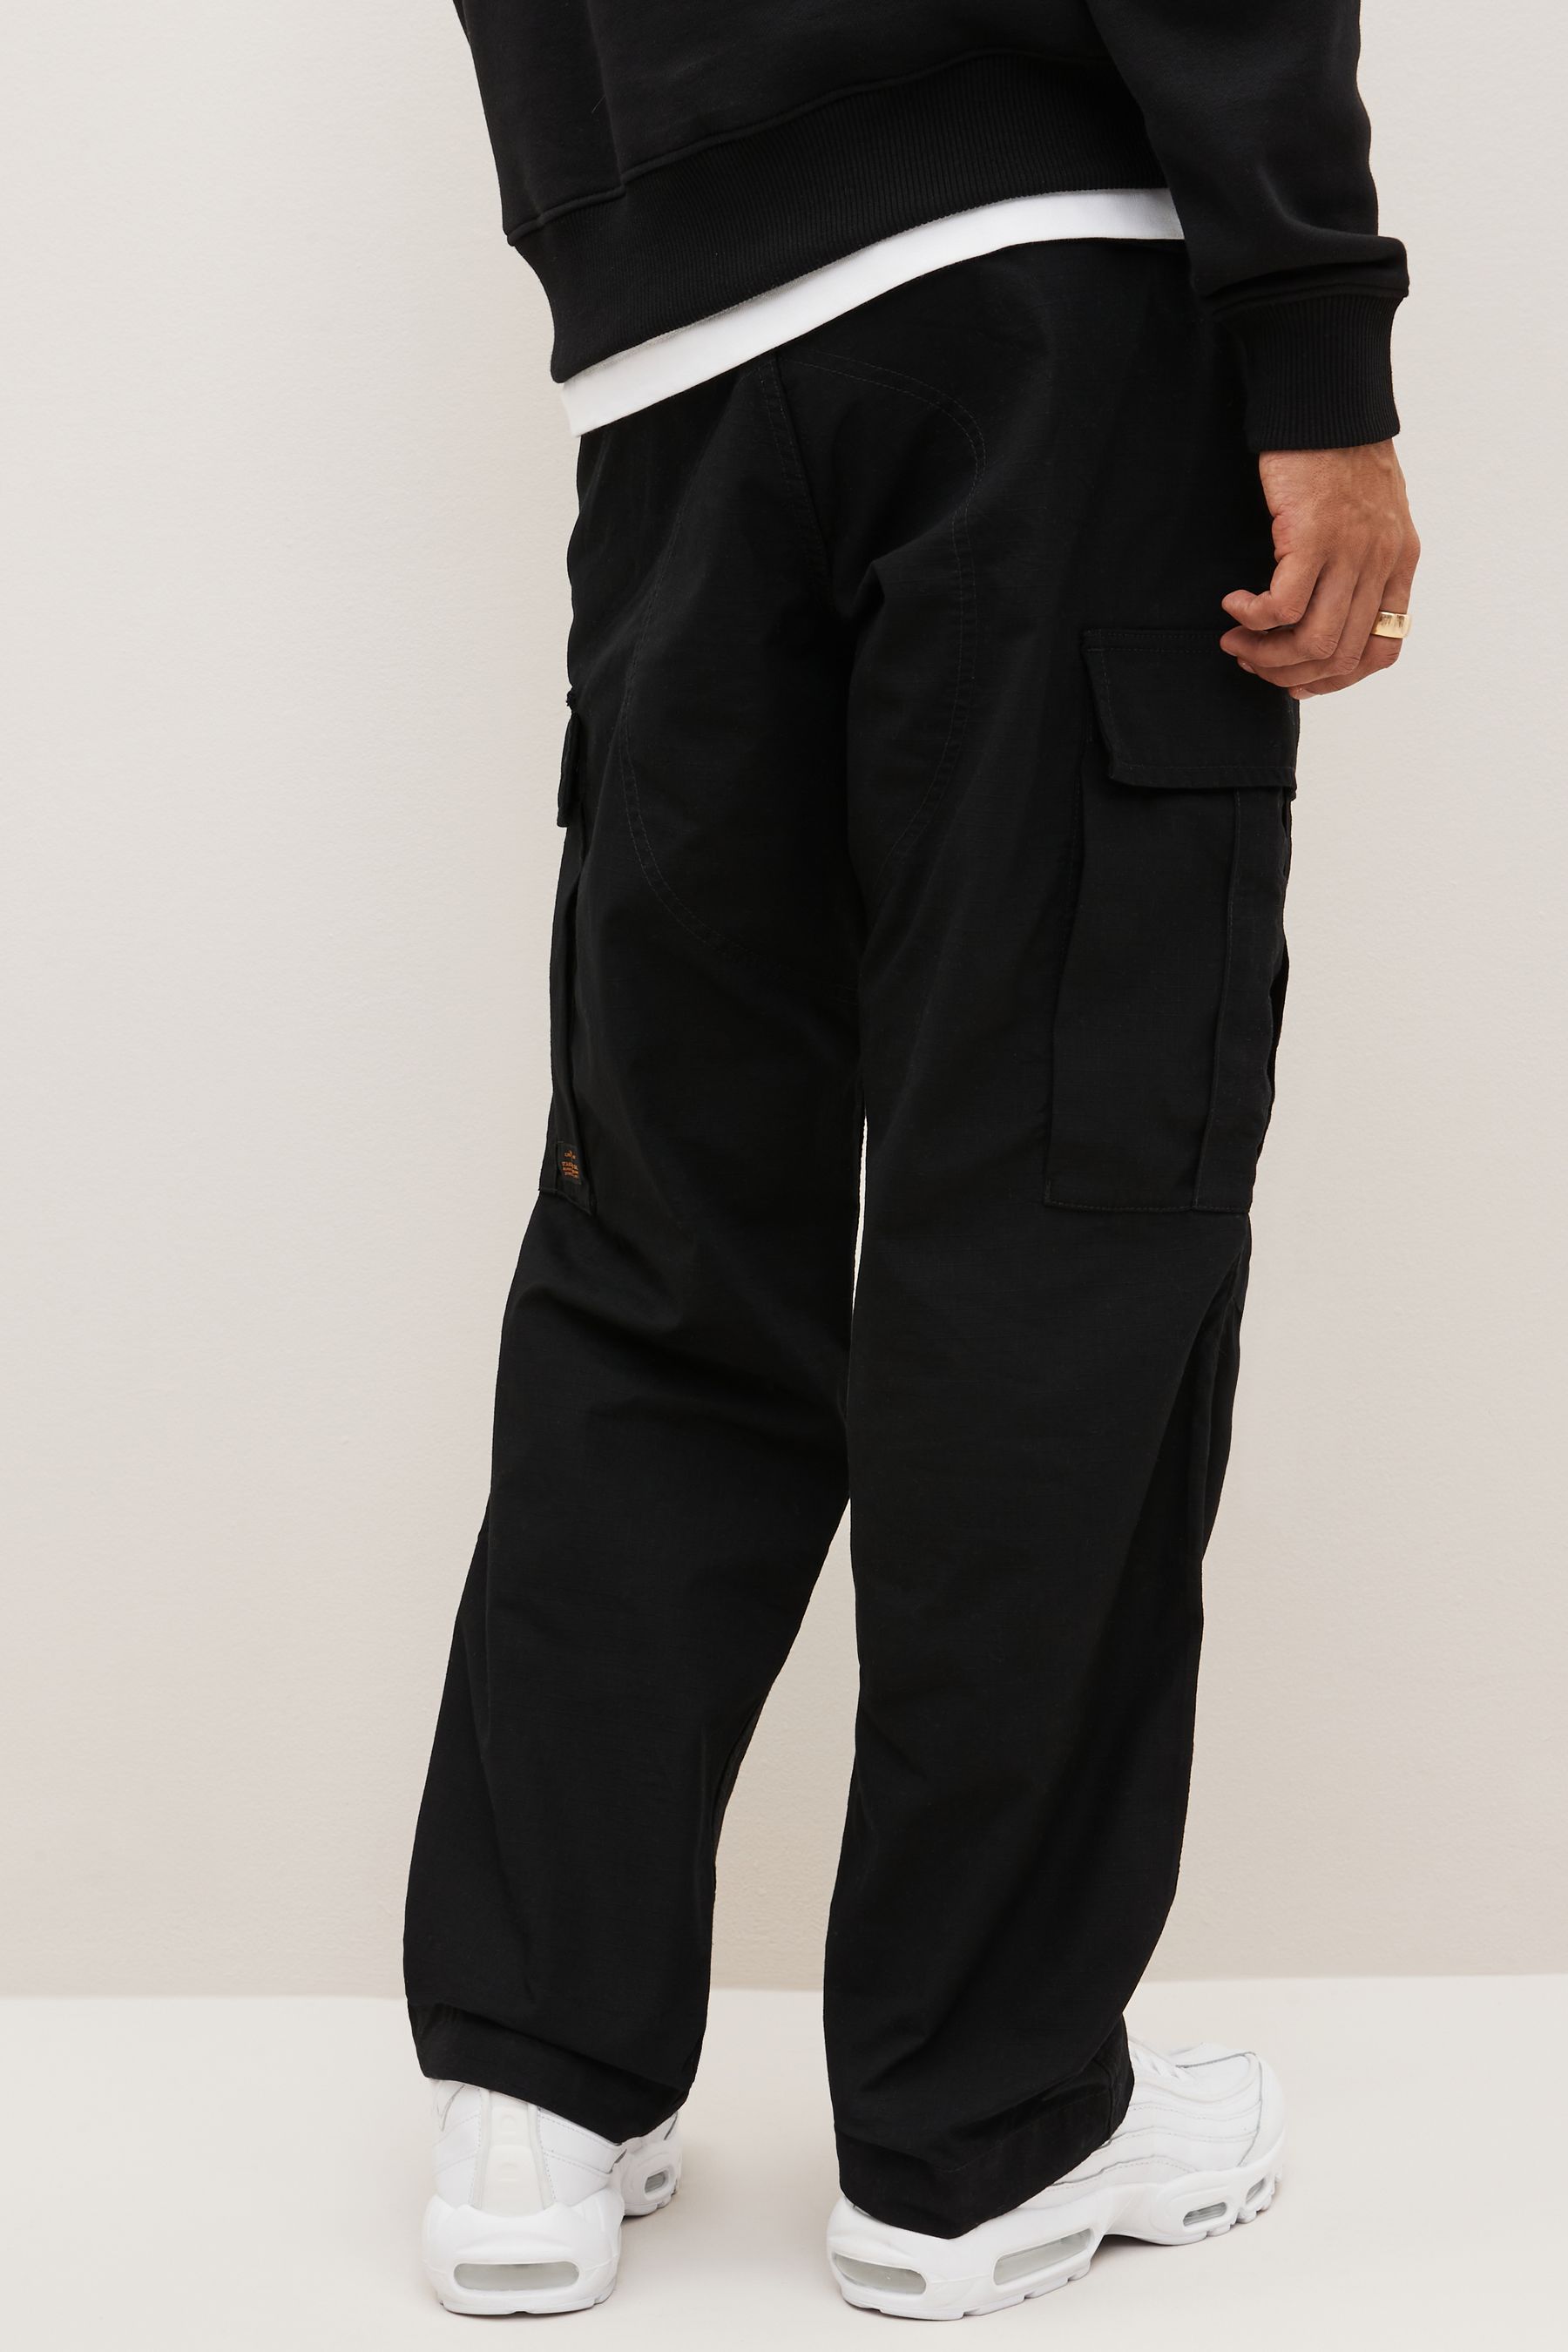 Buy Black Relaxed Fit Ripstop Cargo Trousers from the Next UK online shop